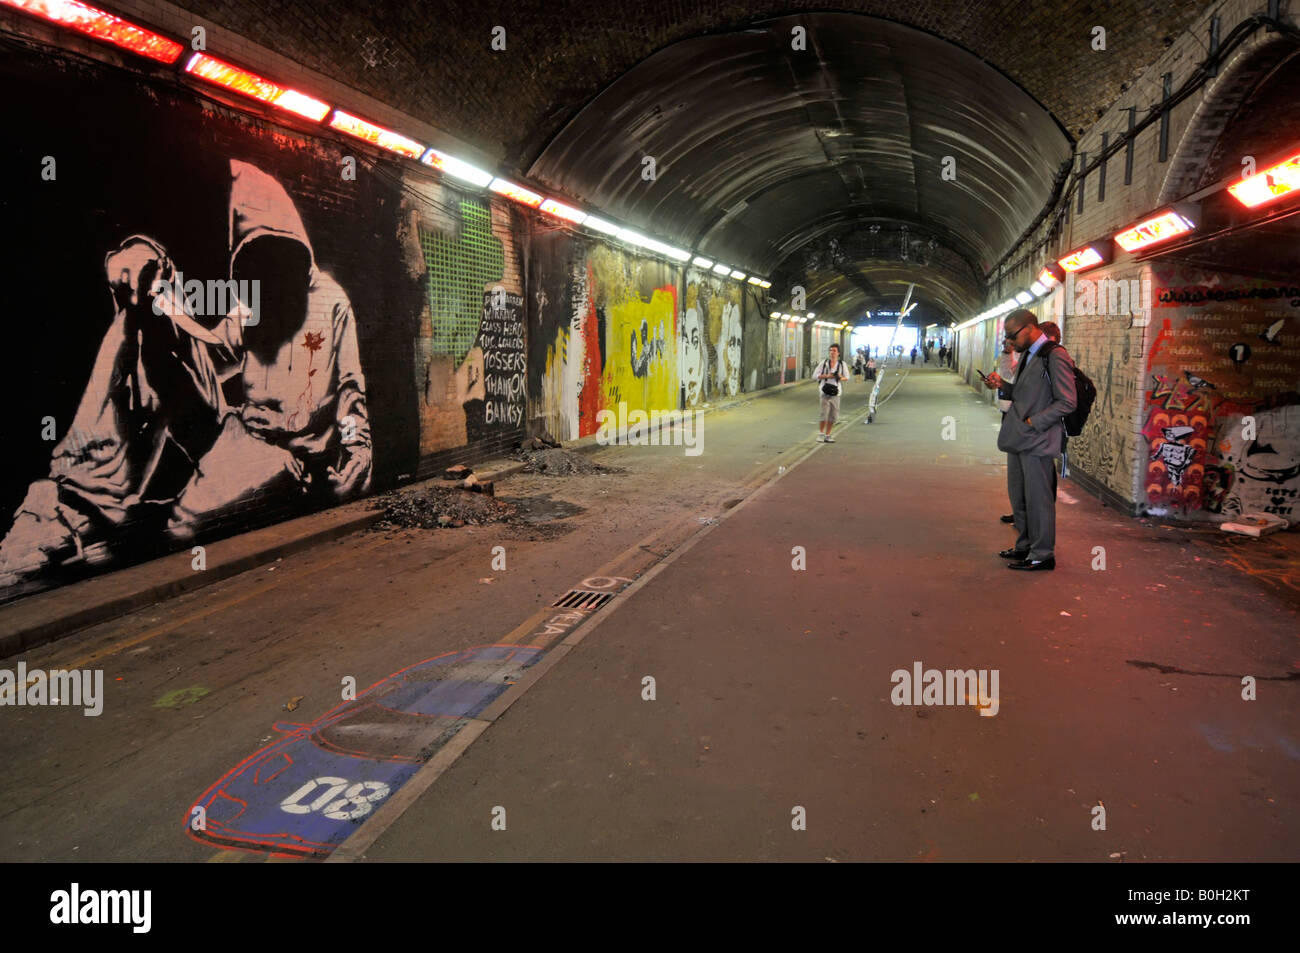 People stop to photograph Graffiti on walls of Leake Street London closed road tunnel under Waterloo train station & railway lines England UK Stock Photo